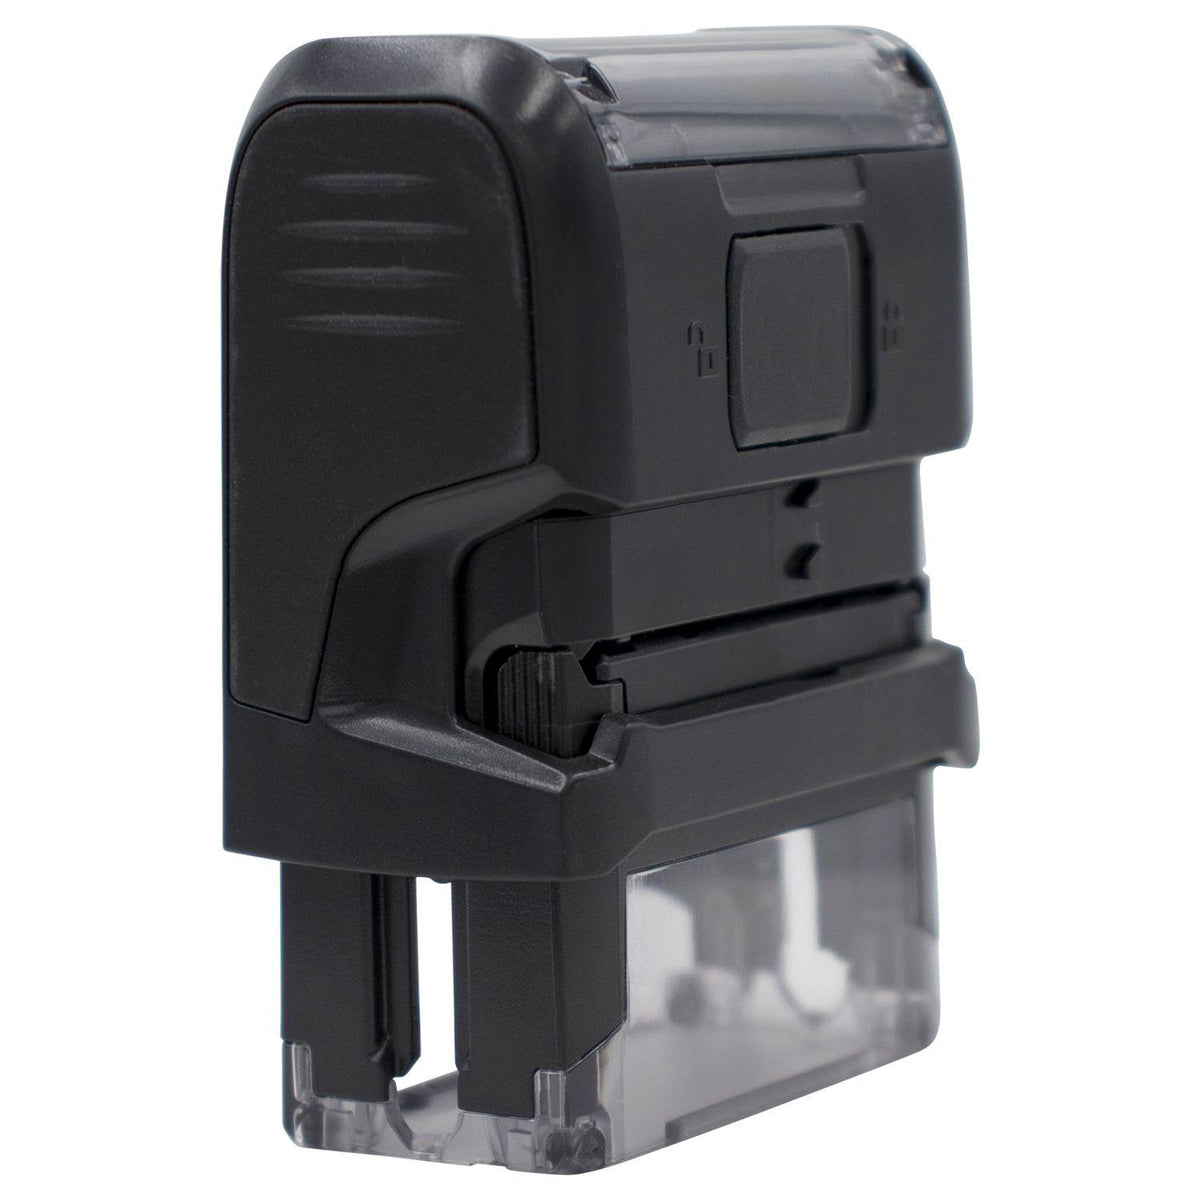 Large Self-Inking Economy Rate Stamp - Engineer Seal Stamps - Brand_Trodat, Impression Size_Large, Stamp Type_Self-Inking Stamp, Type of Use_Postal &amp; Mailing, Type of Use_Shipping &amp; Receiving